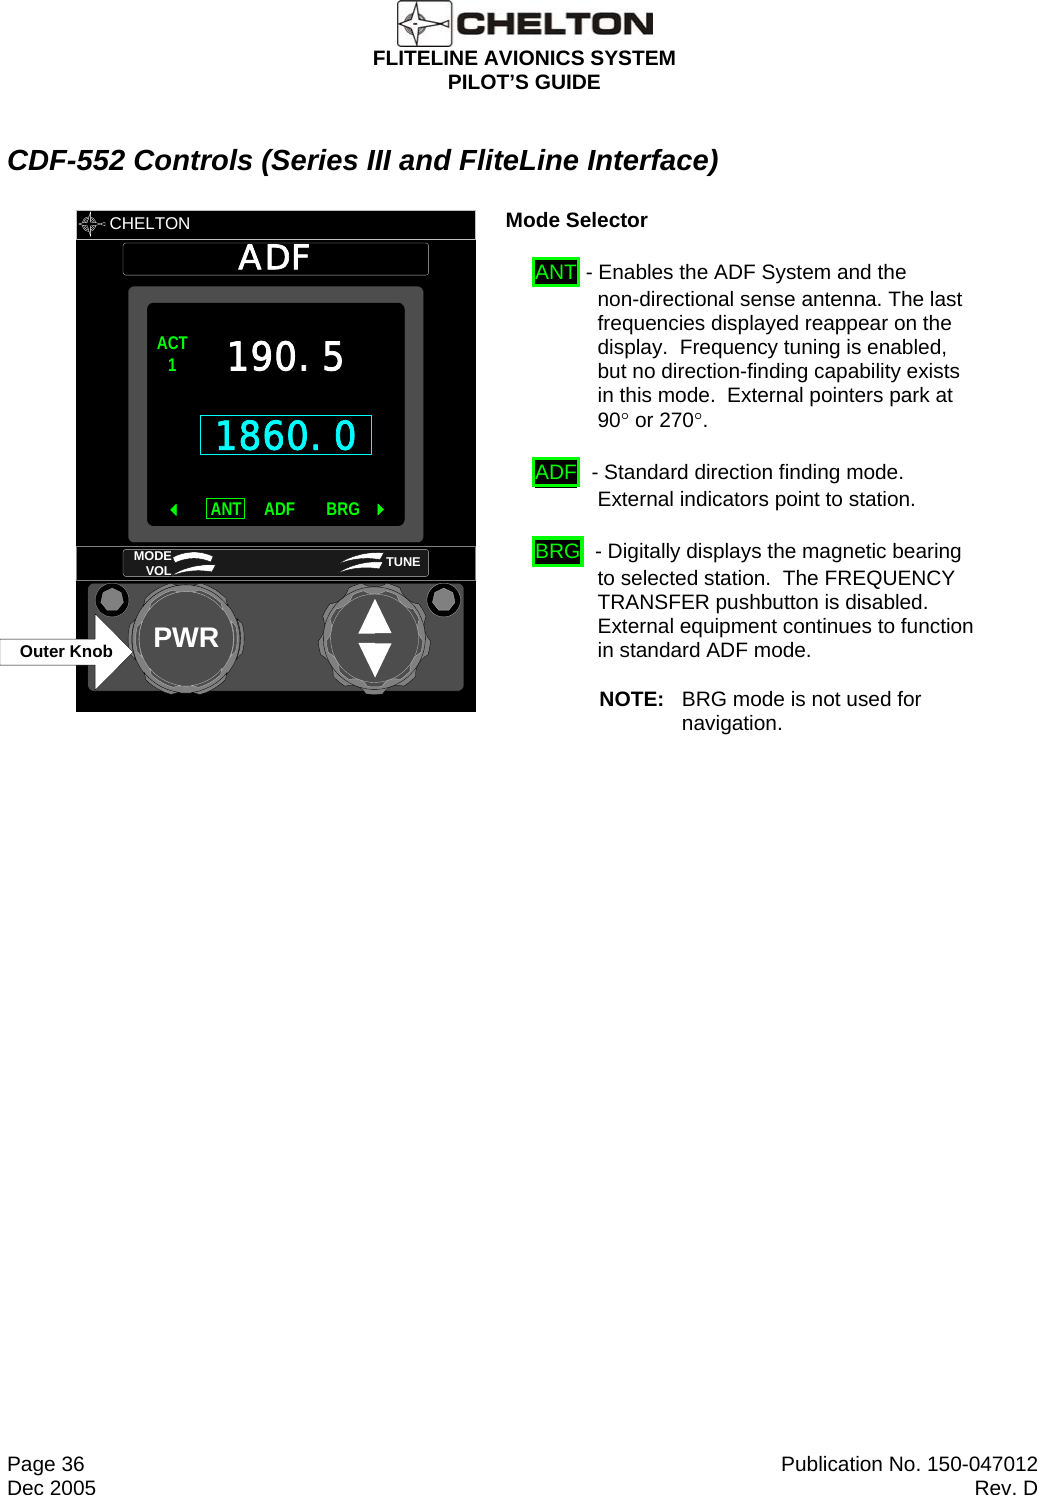  FLITELINE AVIONICS SYSTEM PILOT’S GUIDE  Page 36  Publication No. 150-047012 Dec 2005  Rev. D CDF-552 Controls (Series III and FliteLine Interface)       CHELTON ADFPWR1860.0ACT1 ANT BRGADF 190.5MODE VOL TUNEOuter Knob       Mode Selector  ANT - Enables the ADF System and the non-directional sense antenna. The last frequencies displayed reappear on the display.  Frequency tuning is enabled, but no direction-finding capability exists in this mode.  External pointers park at 90° or 270°. ADF  - Standard direction finding mode.  External indicators point to station. BRG  - Digitally displays the magnetic bearing to selected station.  The FREQUENCY TRANSFER pushbutton is disabled.  External equipment continues to function in standard ADF mode. NOTE:  BRG mode is not used for navigation.   